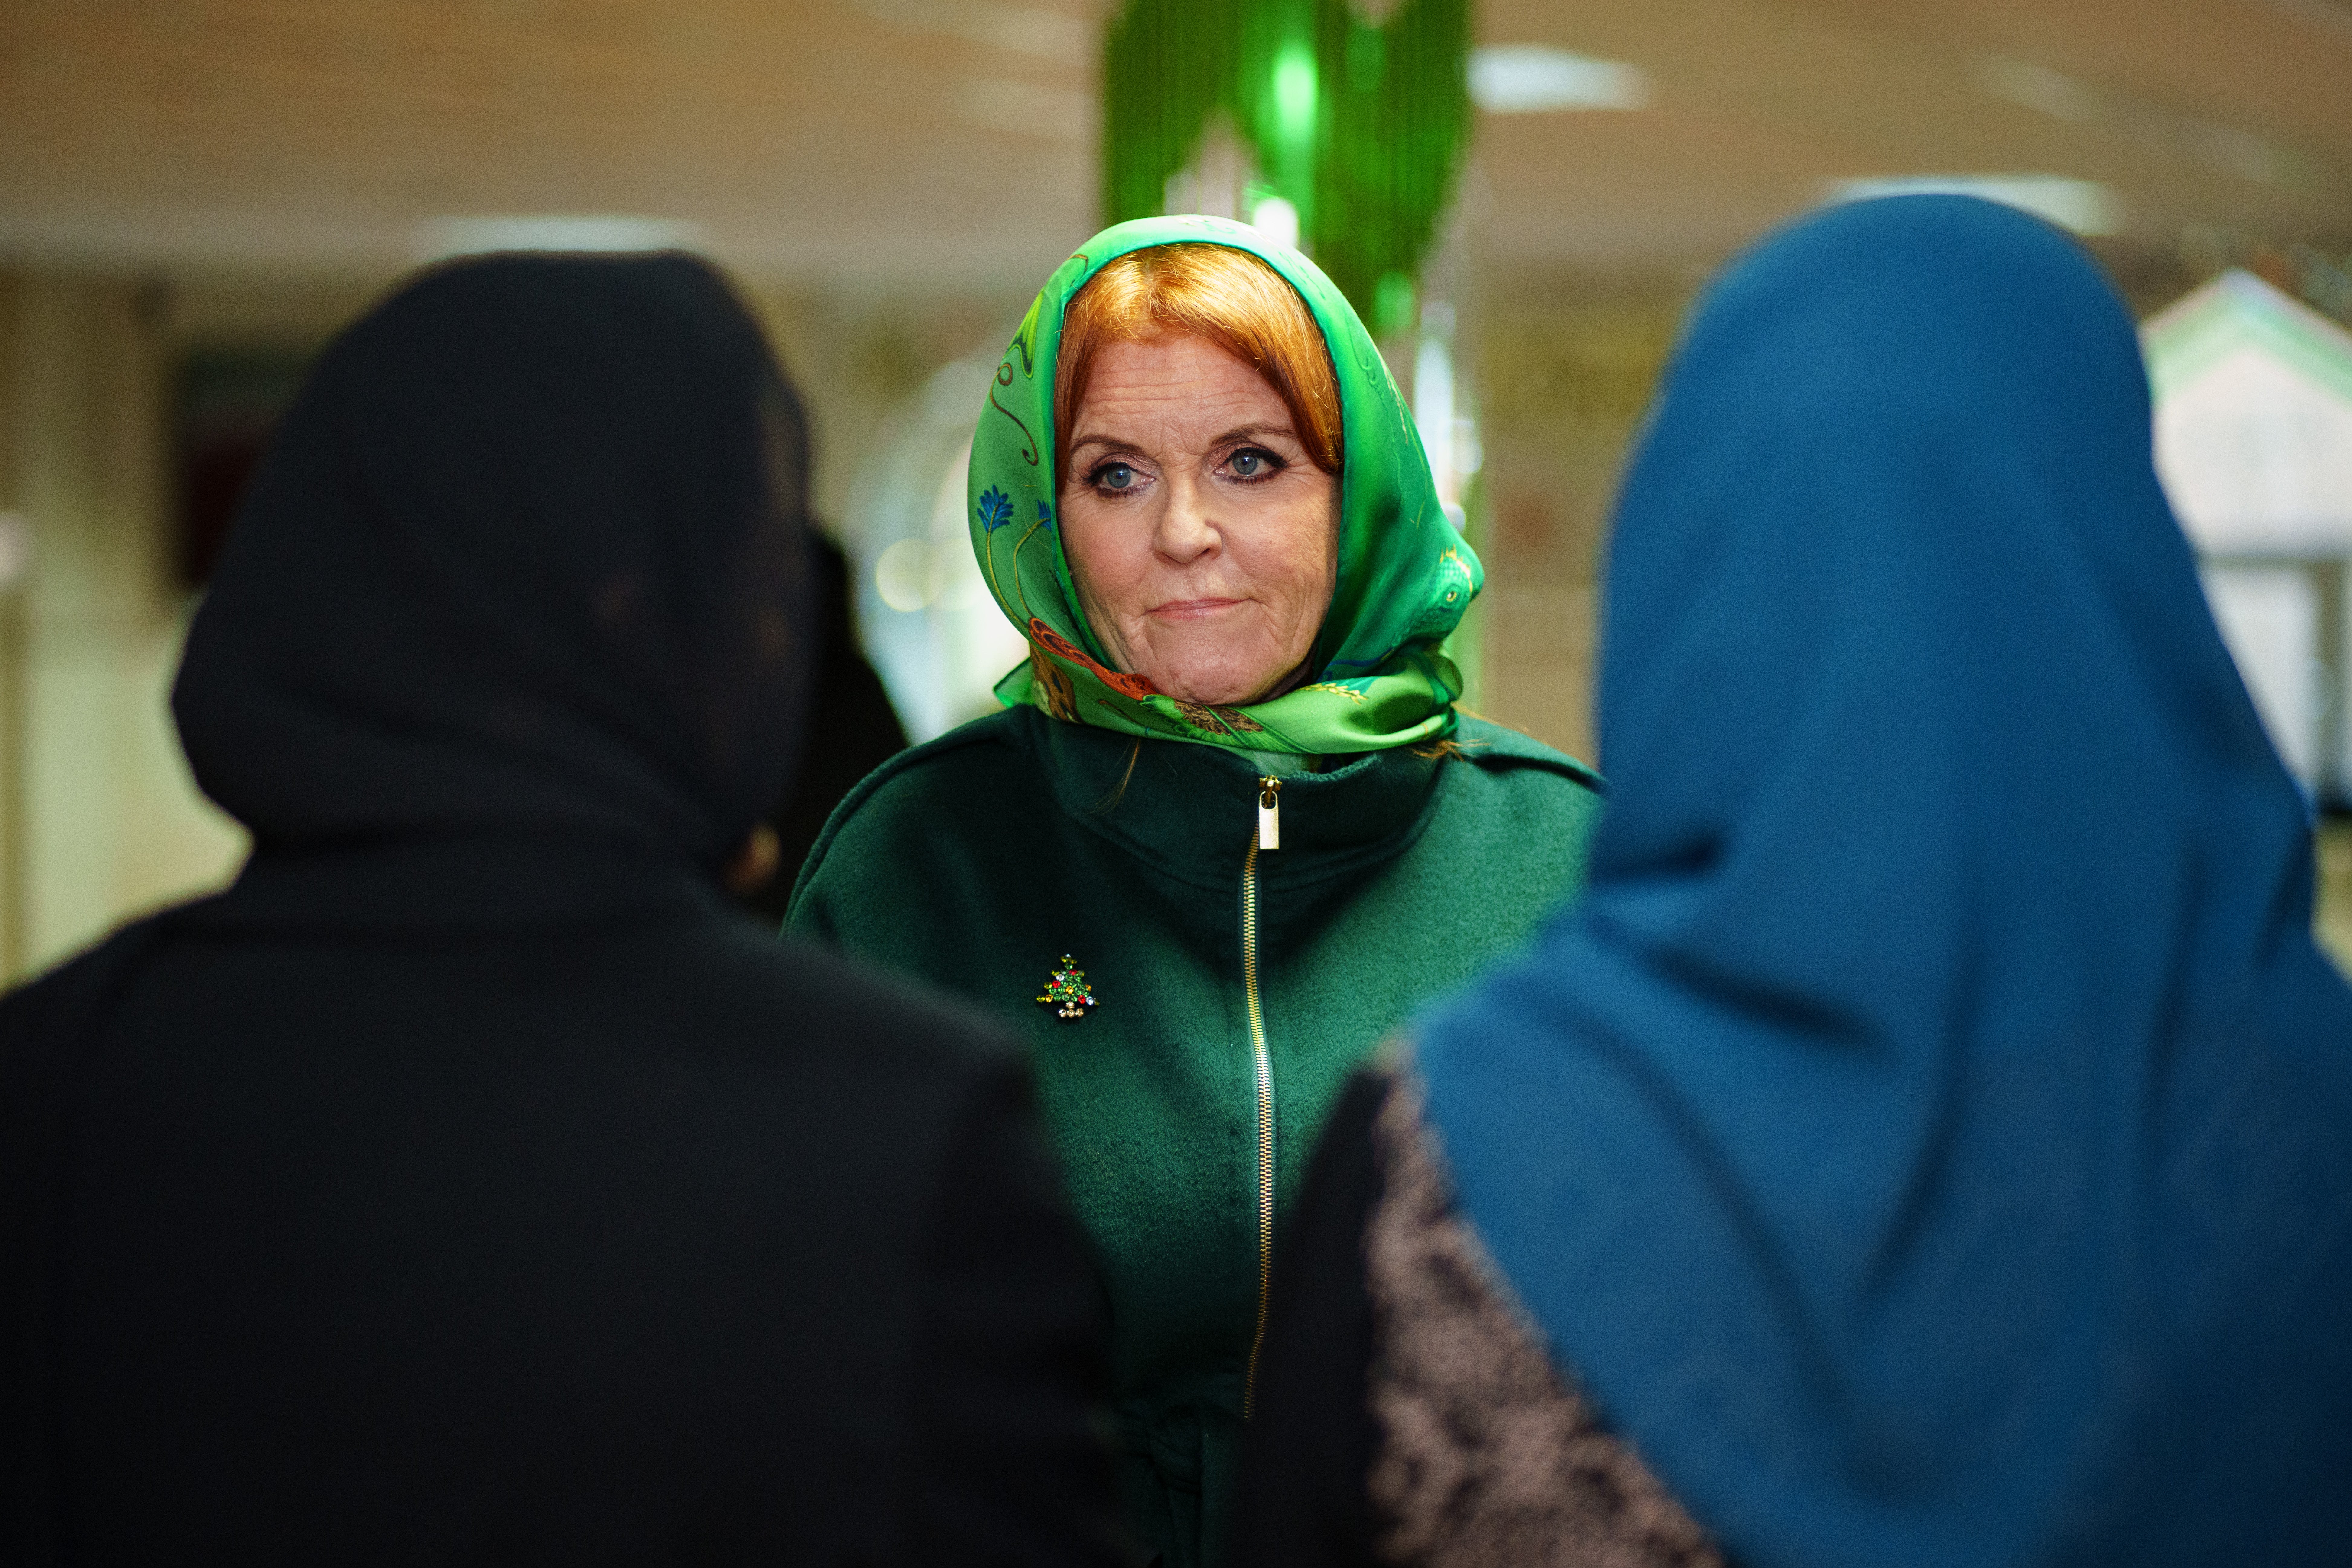 The duchess talks with community members at Ghausia Masjid mosque in Burnley